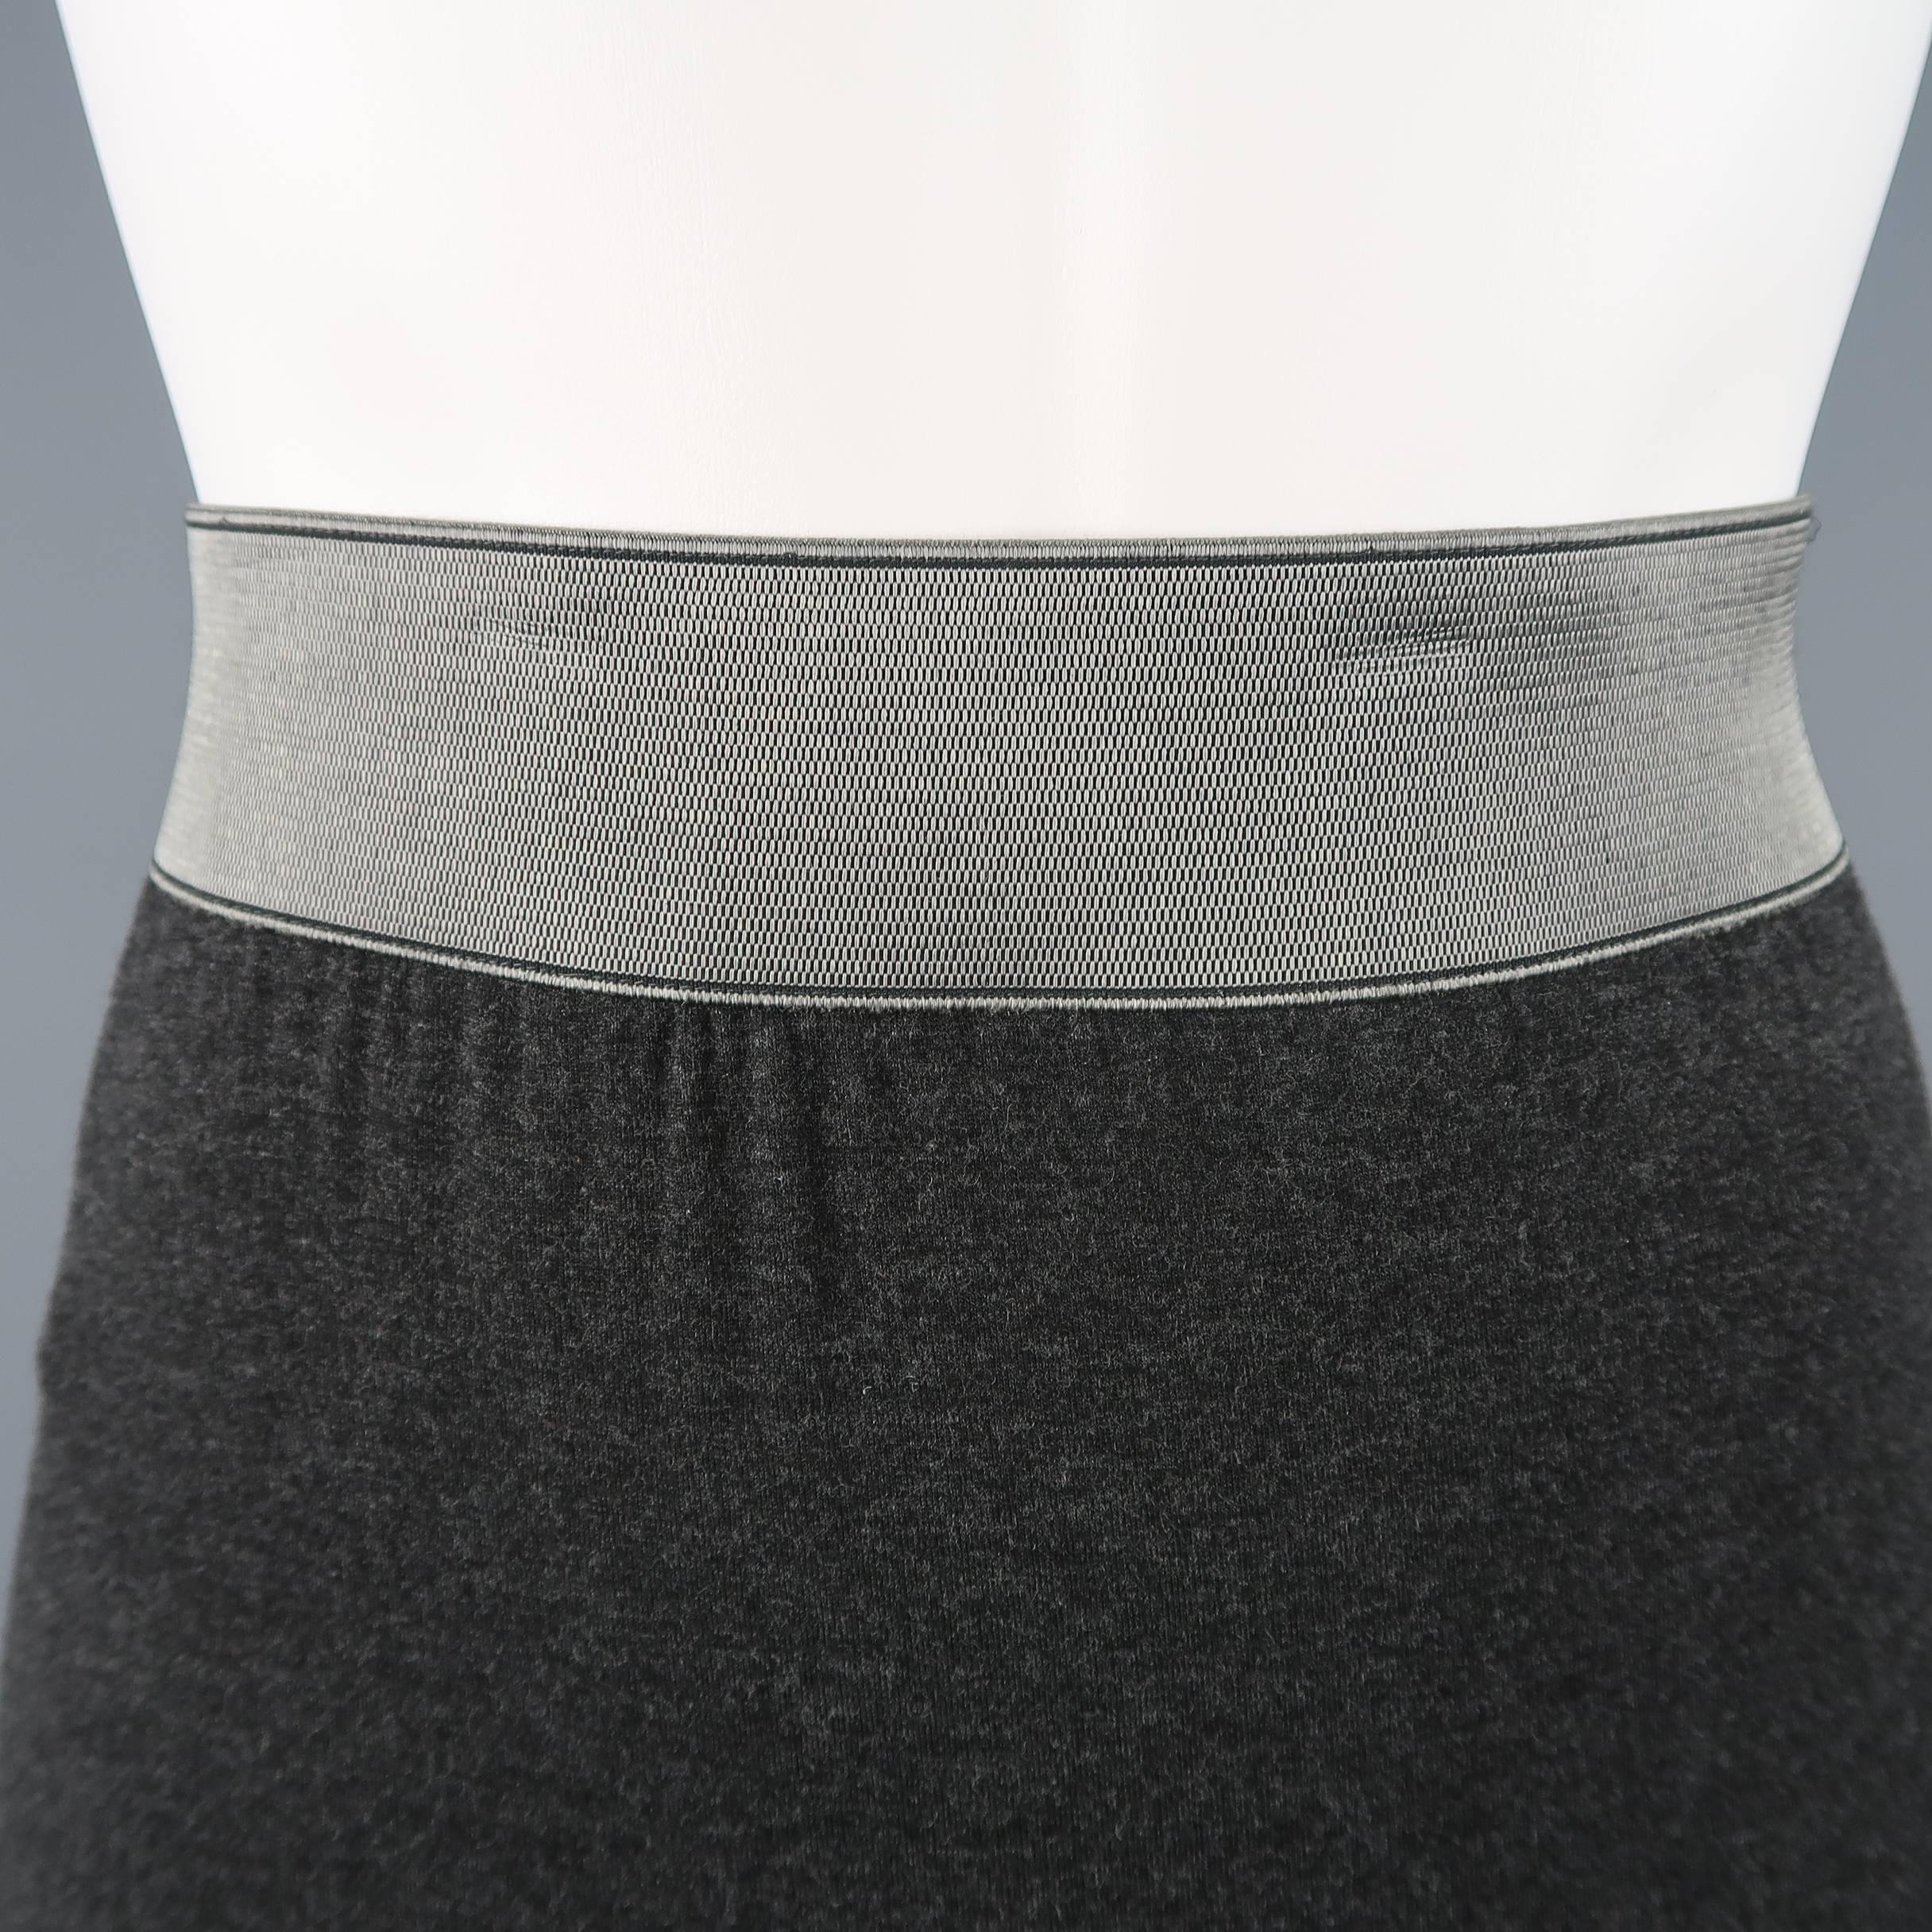 DONNA KARAN pencil skirt comes in charcoal heather gray stretch jersey with a thick metallic silver elastic waistband.
 
Excellent Pre-Owned Condition.
Marked: M
 
Measurements:
 
Waist: 29 in.
Hip: 38 in.
Length: 32 in.
